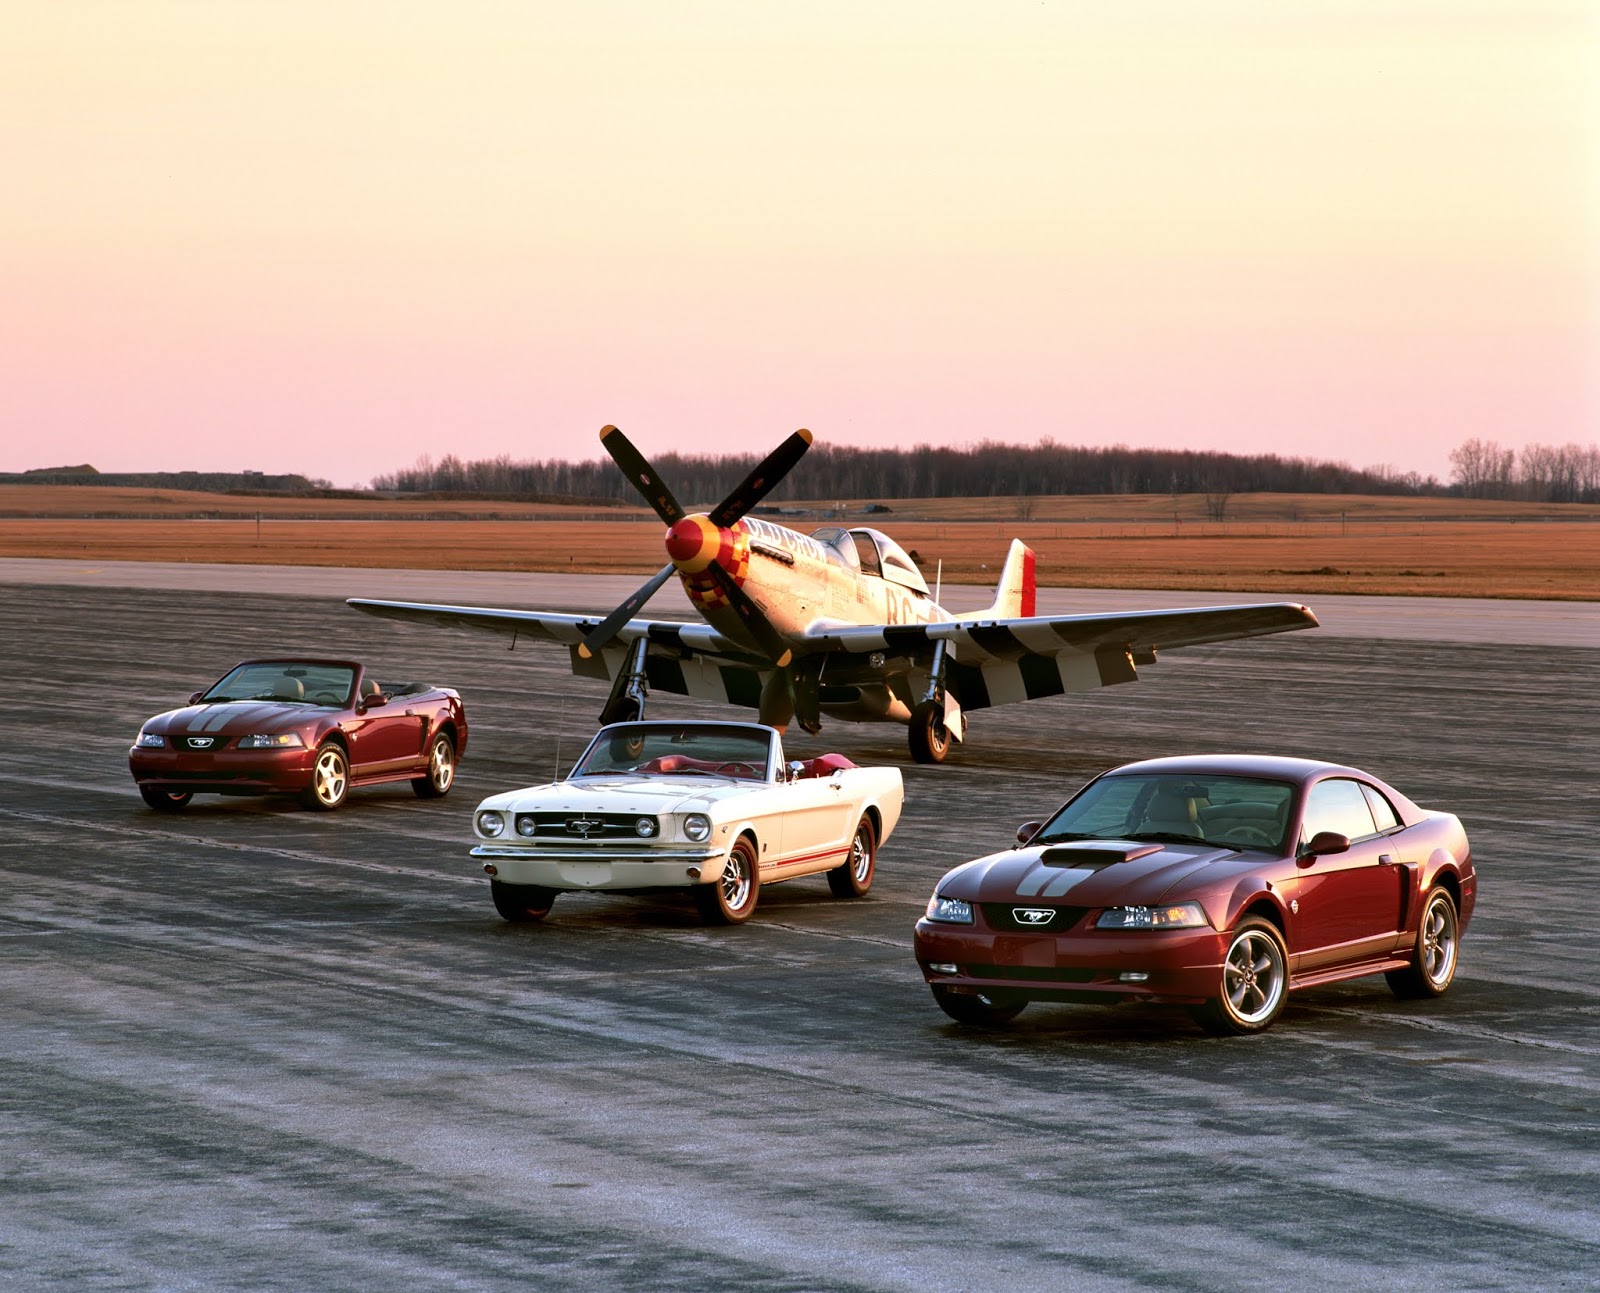 2004 Ford Mustang Anniversary edition and 1965 Mustang with P 51 1 Πώς γιορτάζει η Mustang τα 55 της χρόνια;